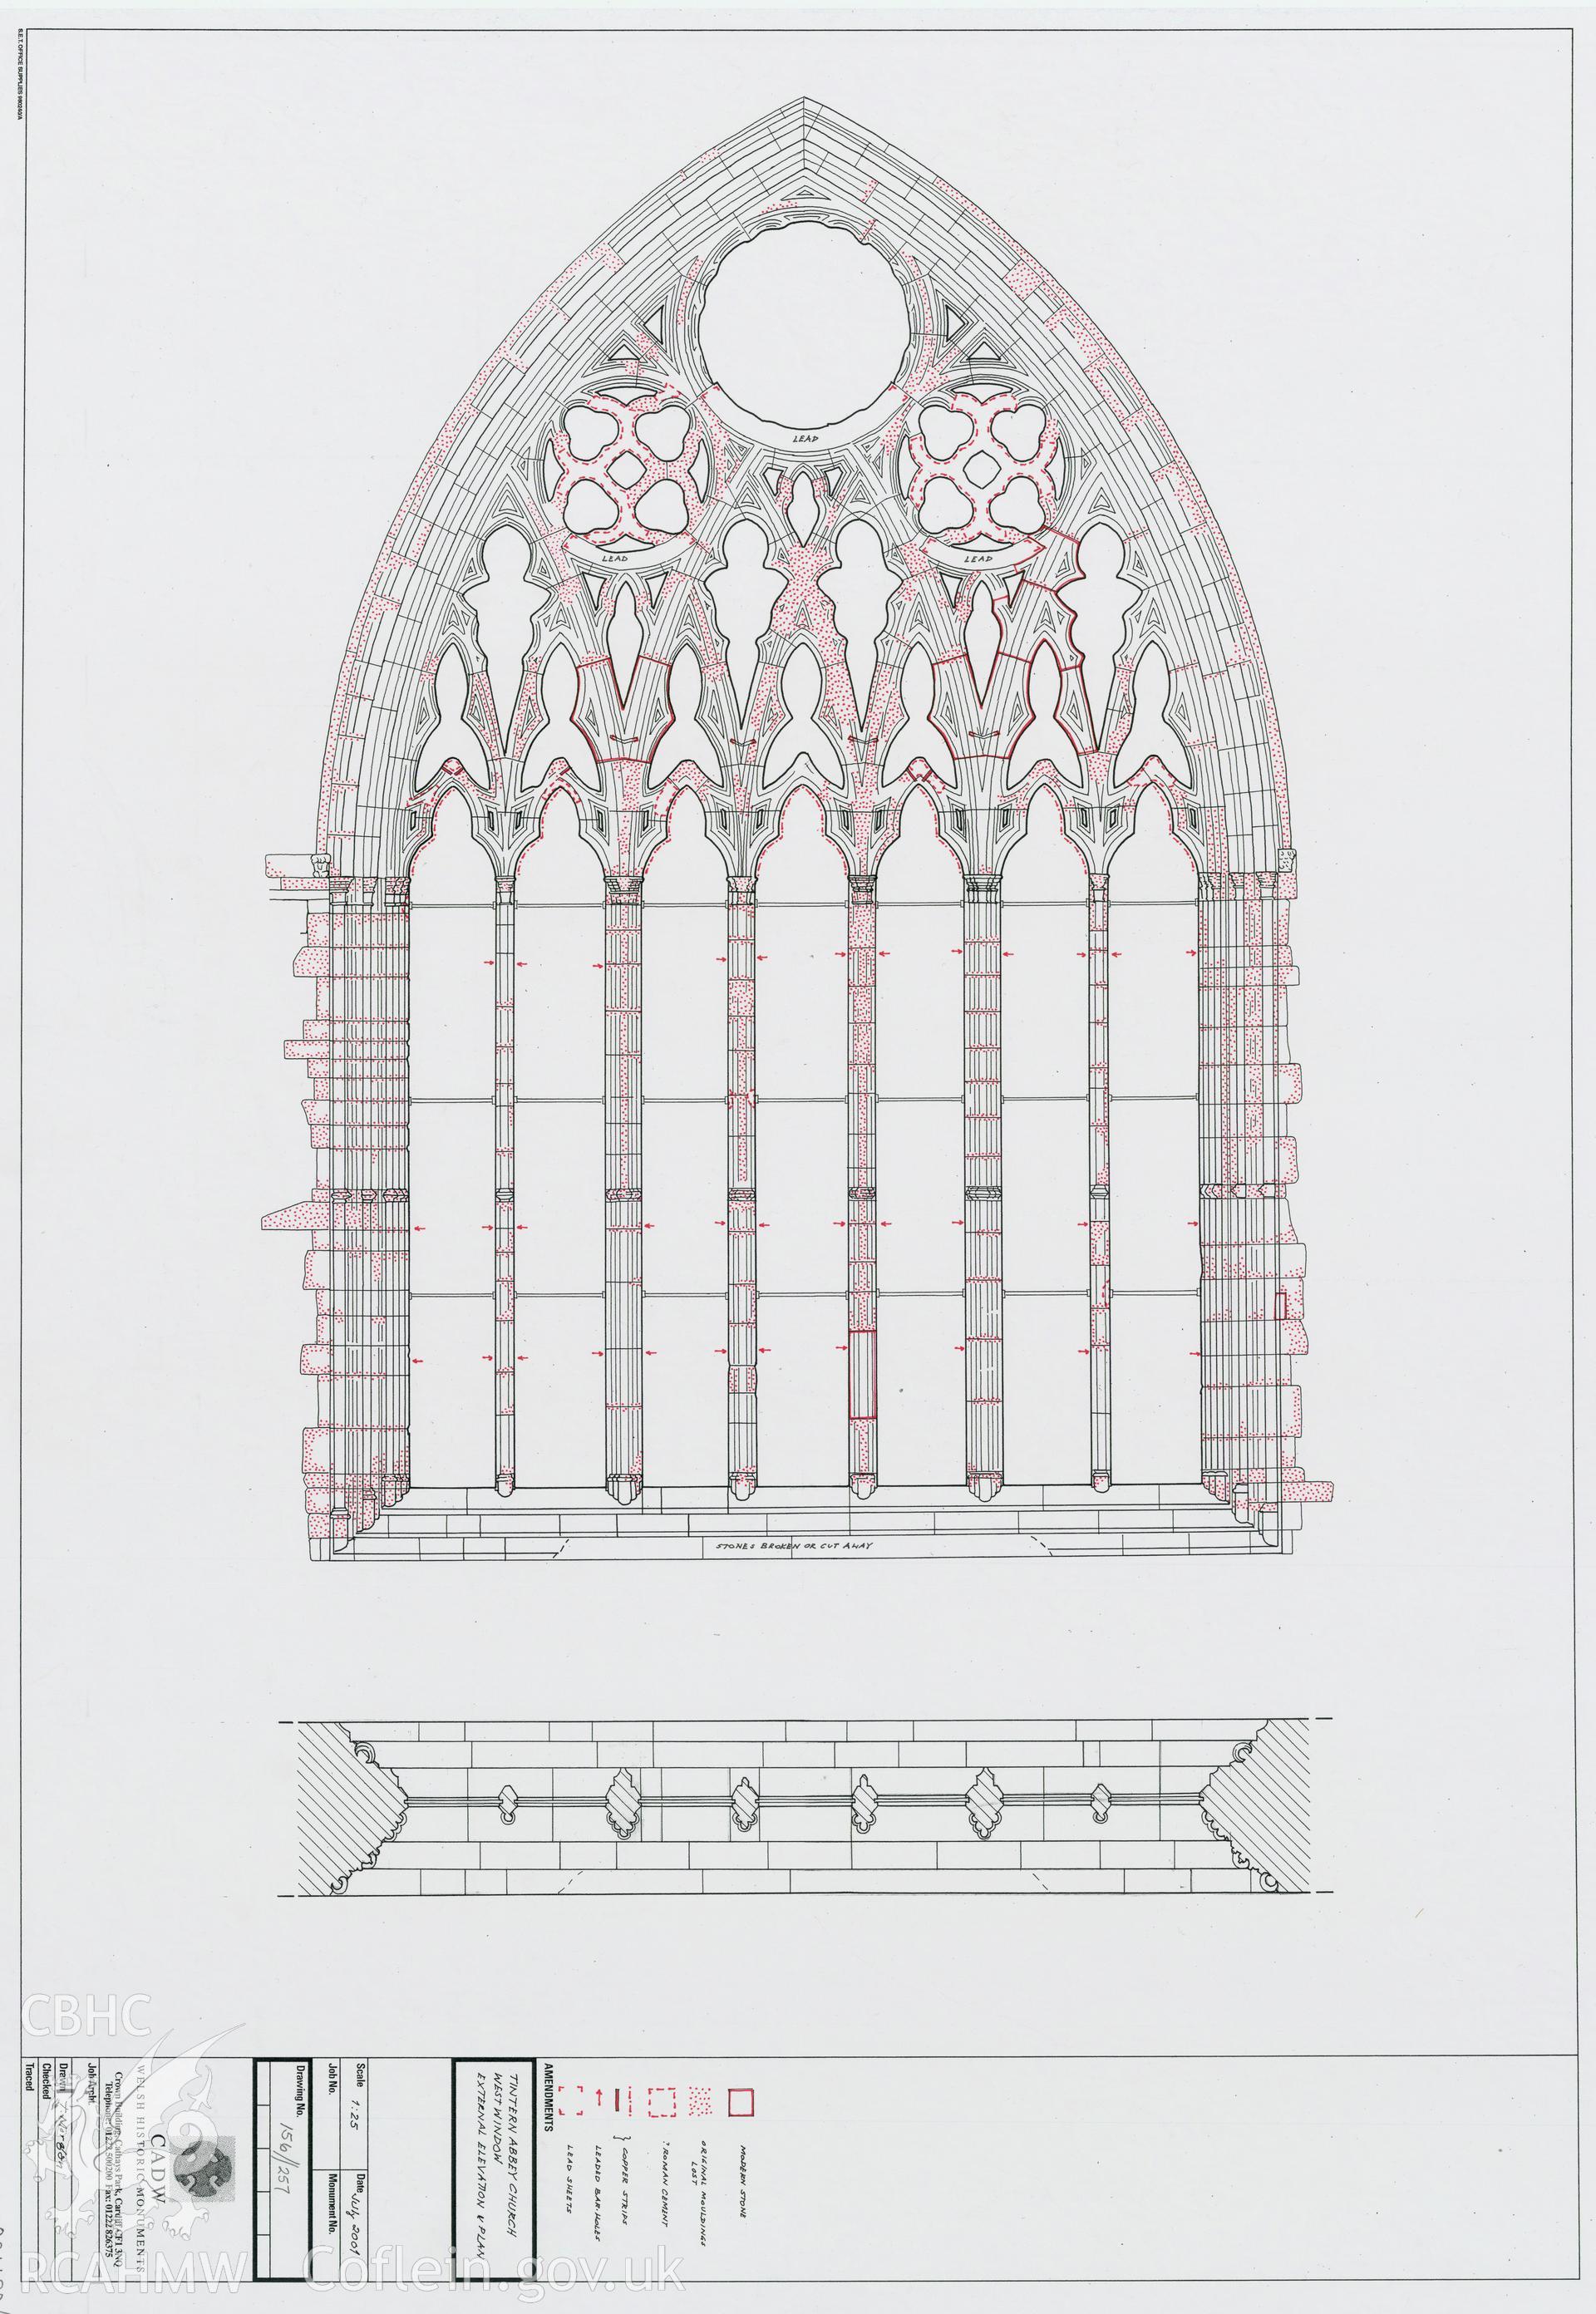 Digital copy of Cadw guardianship monument drawing of Tintern Abbey, plan and external elevation of west window, dated July 2001.